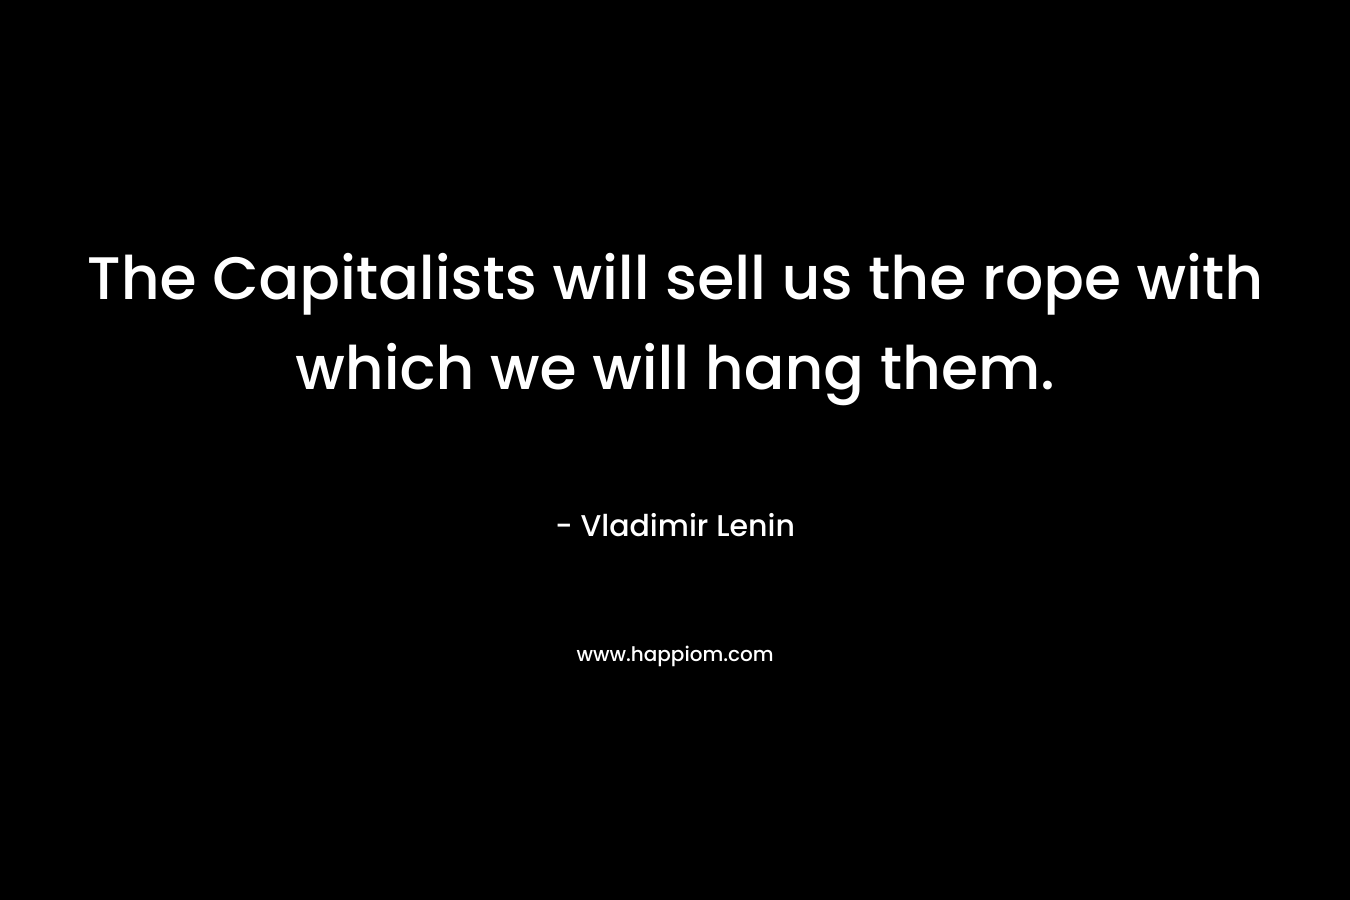 The Capitalists will sell us the rope with which we will hang them. – Vladimir Lenin